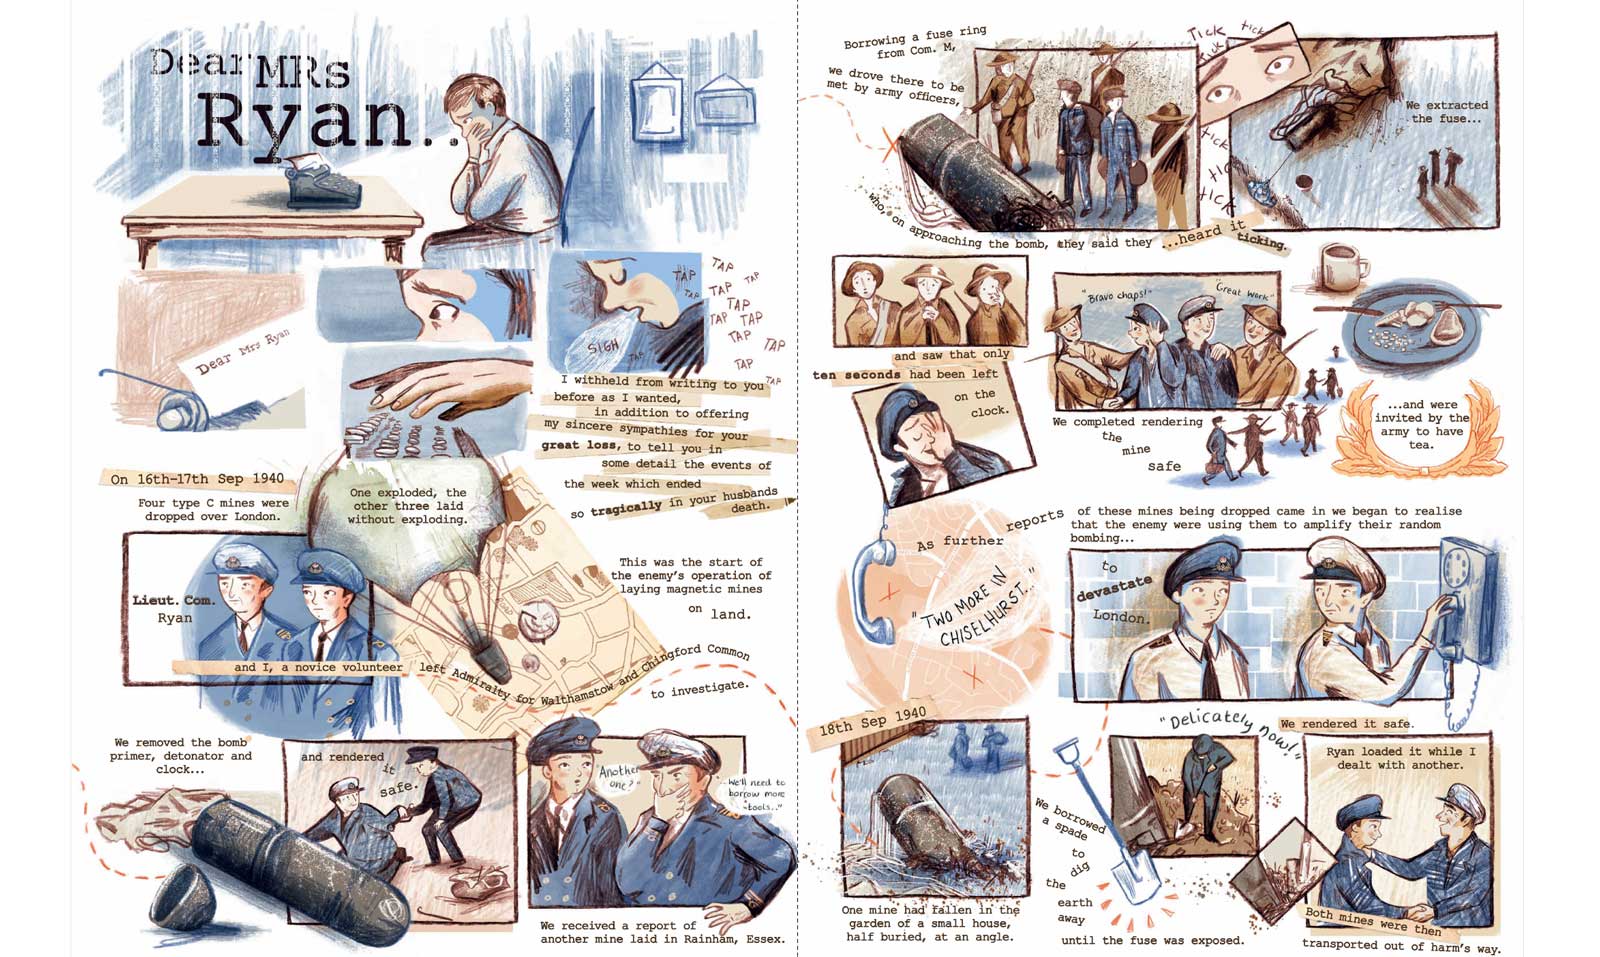 A two-page spread of a colourful illustrated story showing men in military uniform and bombs being defused.